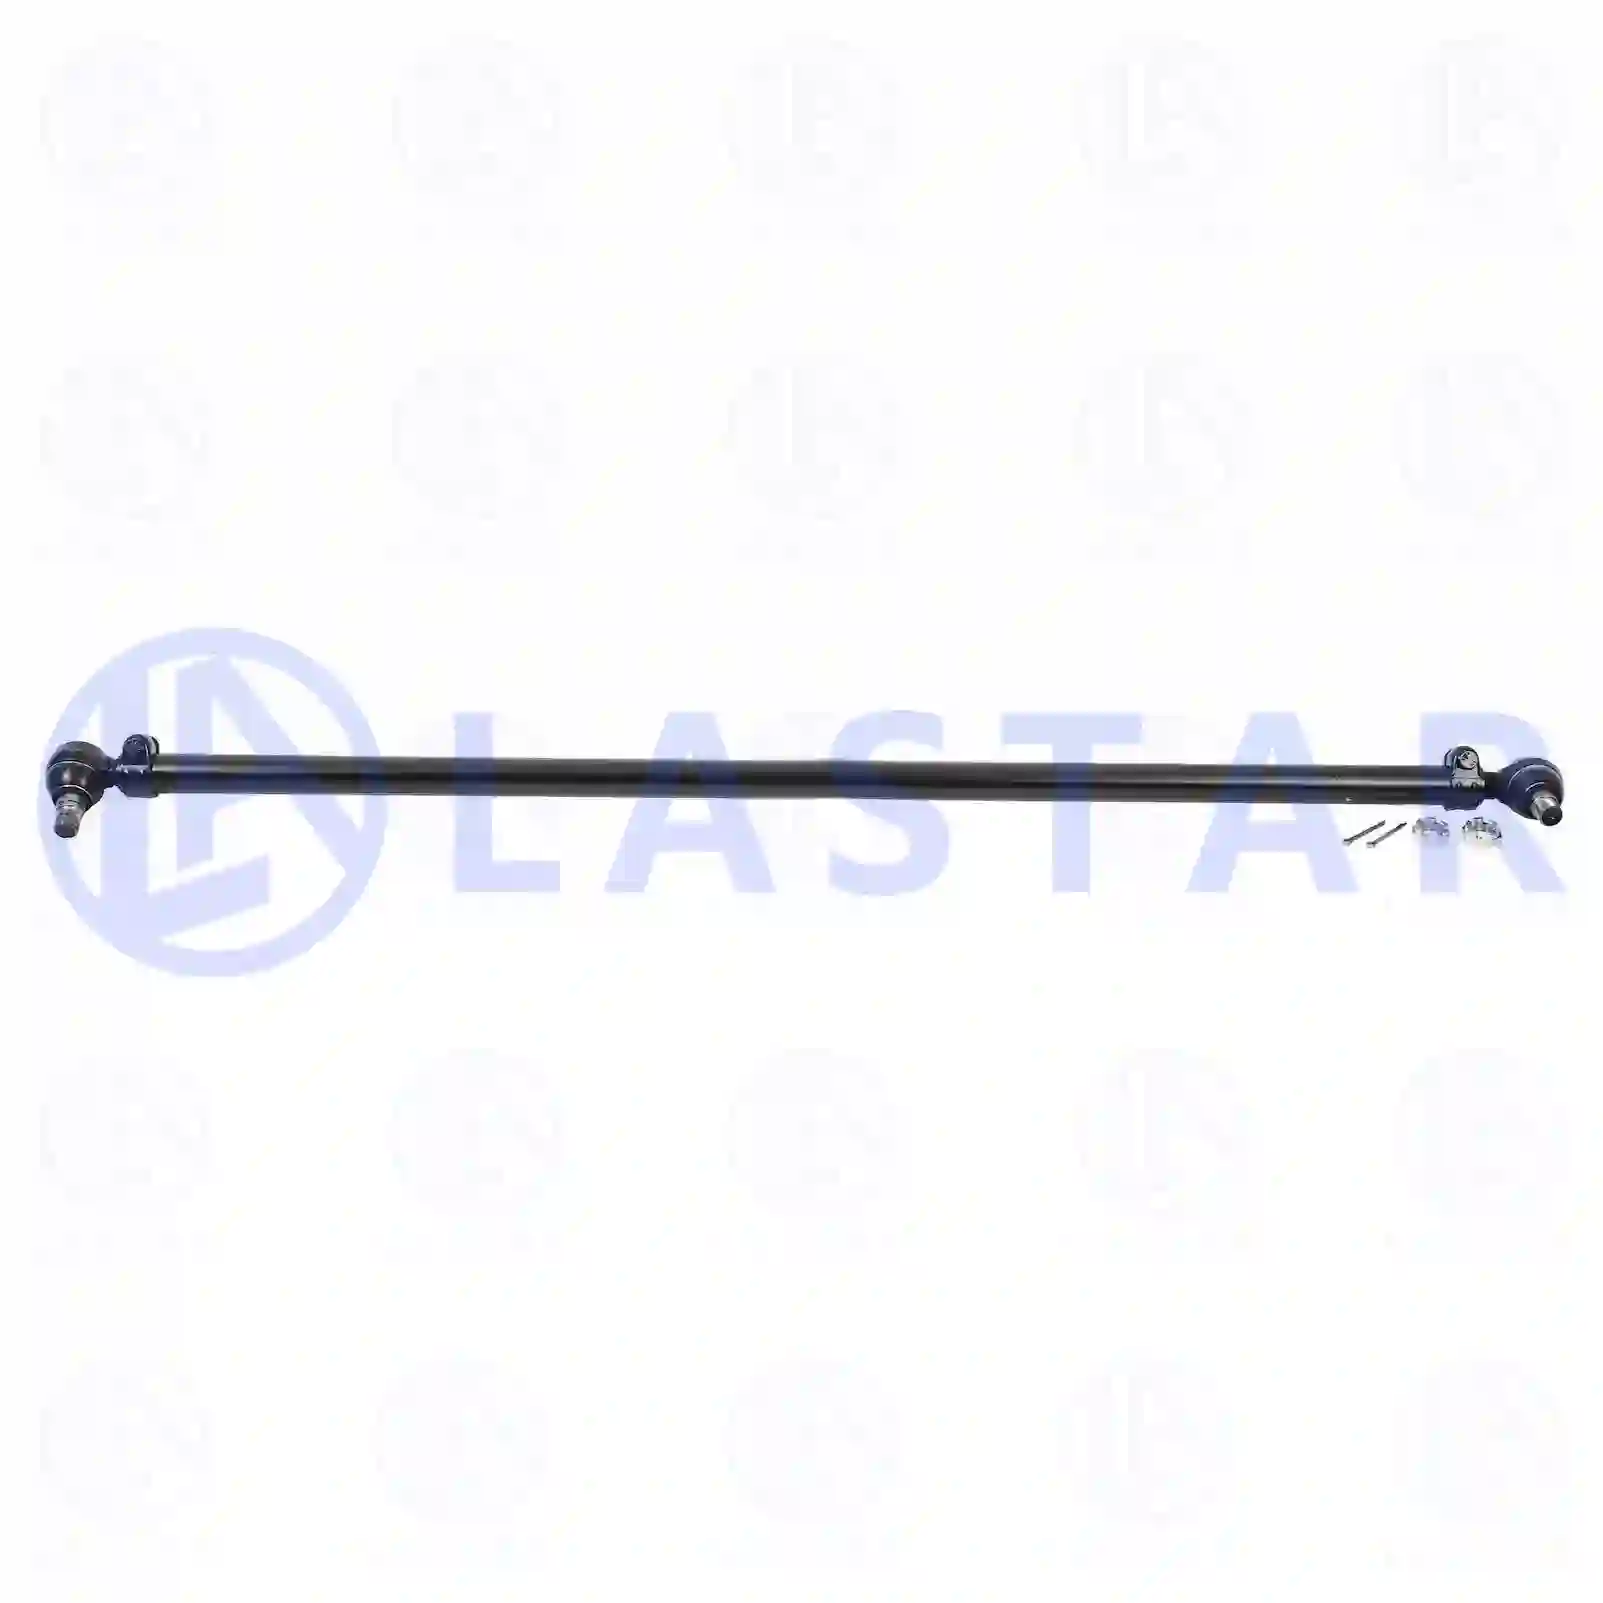 Track rod, 77731250, 1524382 ||  77731250 Lastar Spare Part | Truck Spare Parts, Auotomotive Spare Parts Track rod, 77731250, 1524382 ||  77731250 Lastar Spare Part | Truck Spare Parts, Auotomotive Spare Parts